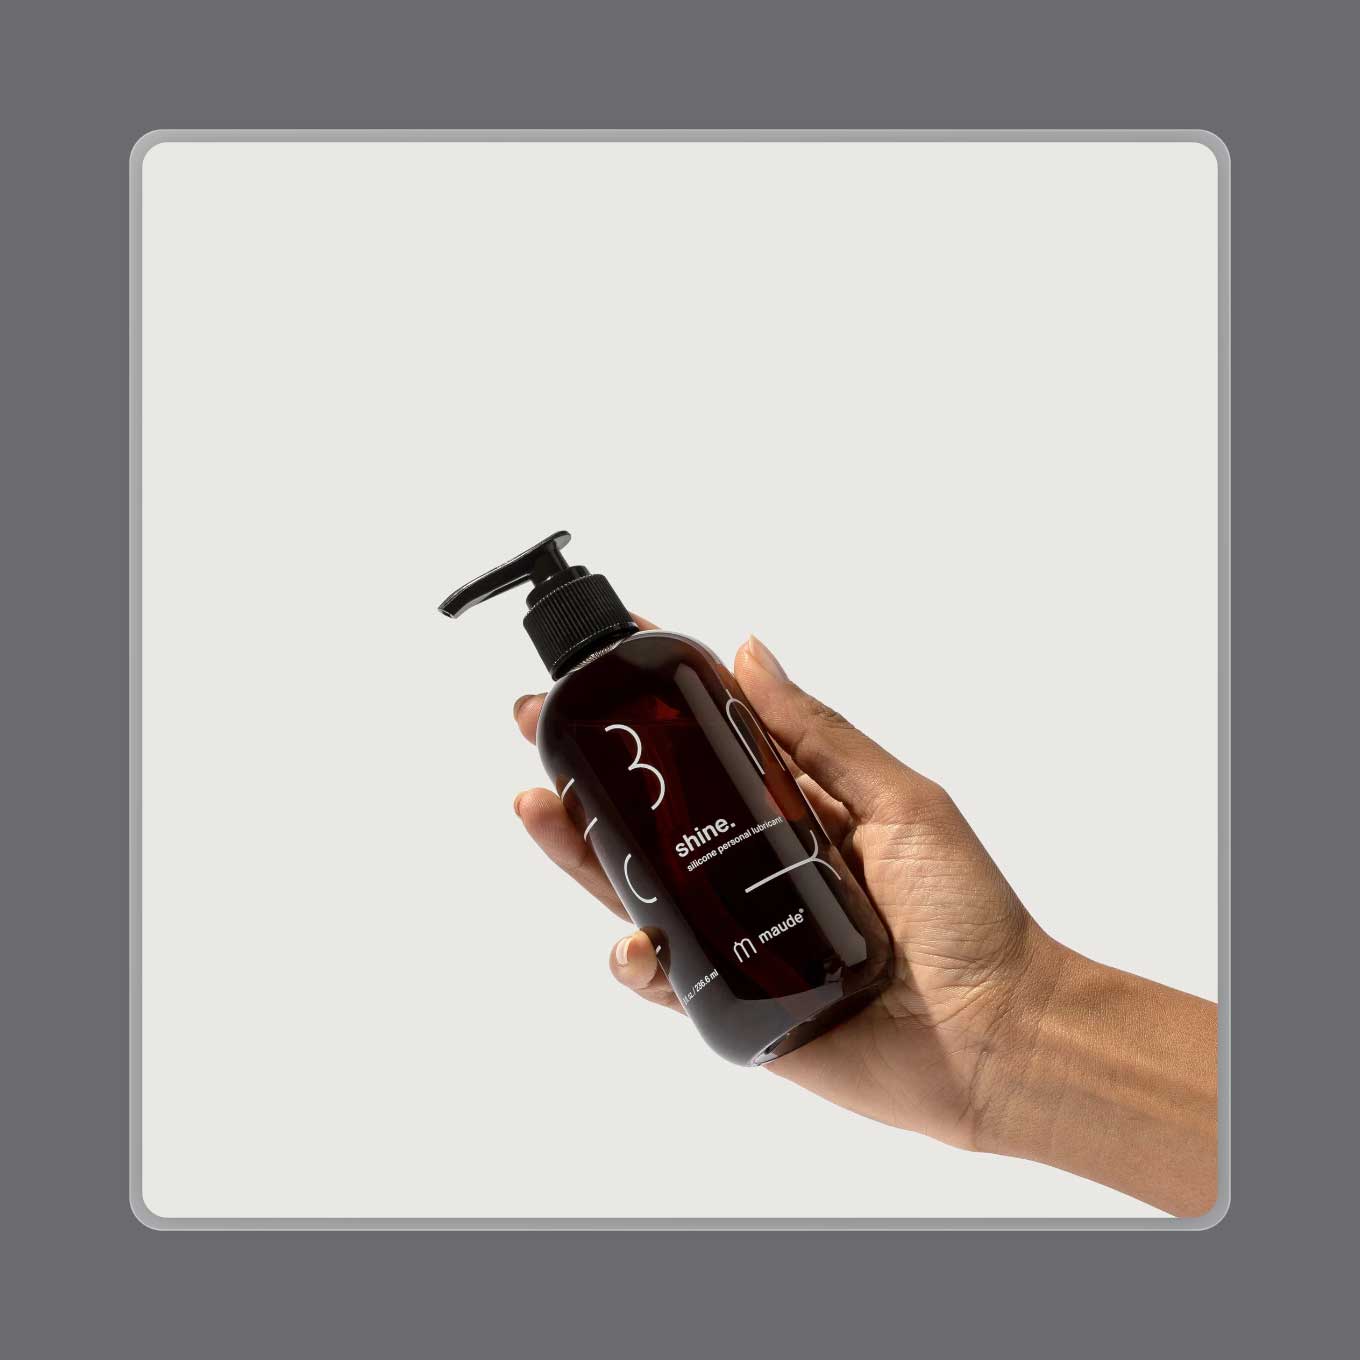 A hand holds up a bottle of Maude's Shine Silicone lube